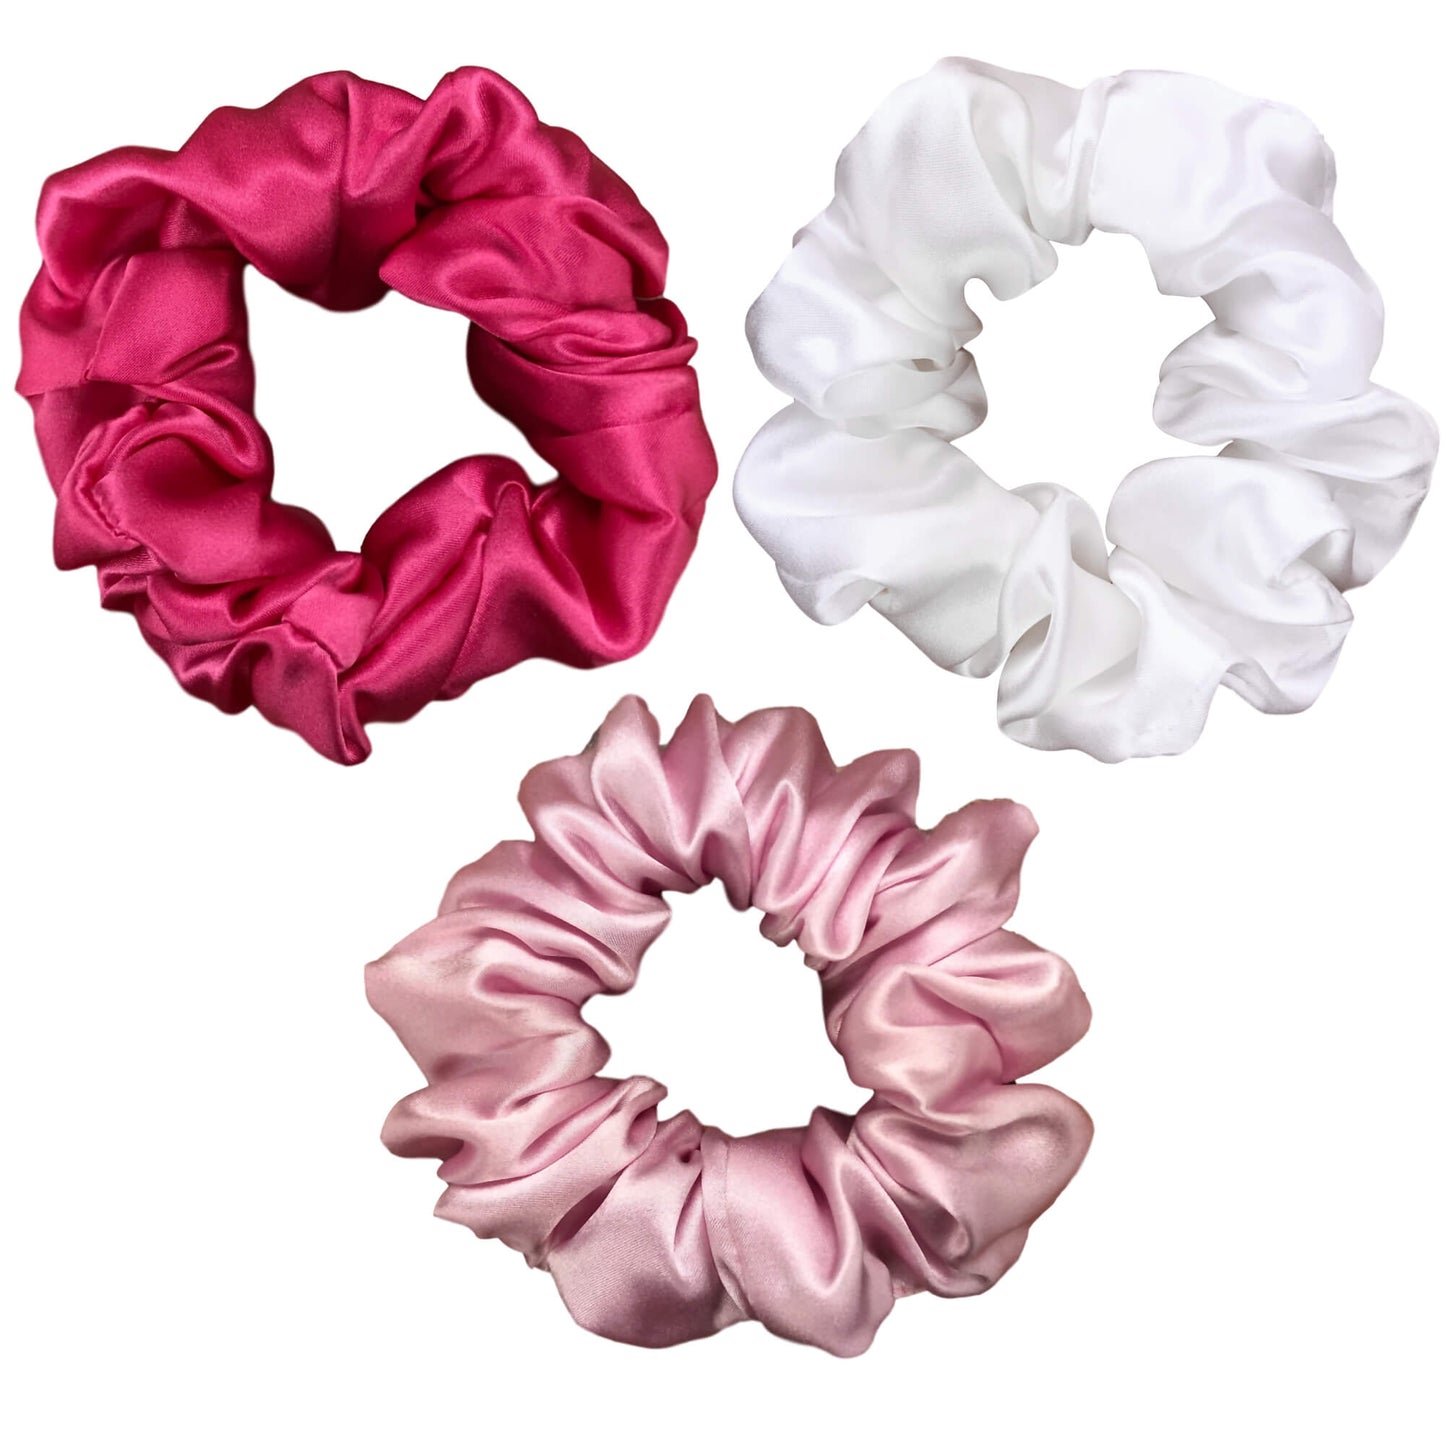 Soft pink hot pink and white silk scrunchies by celestial silk with a white background